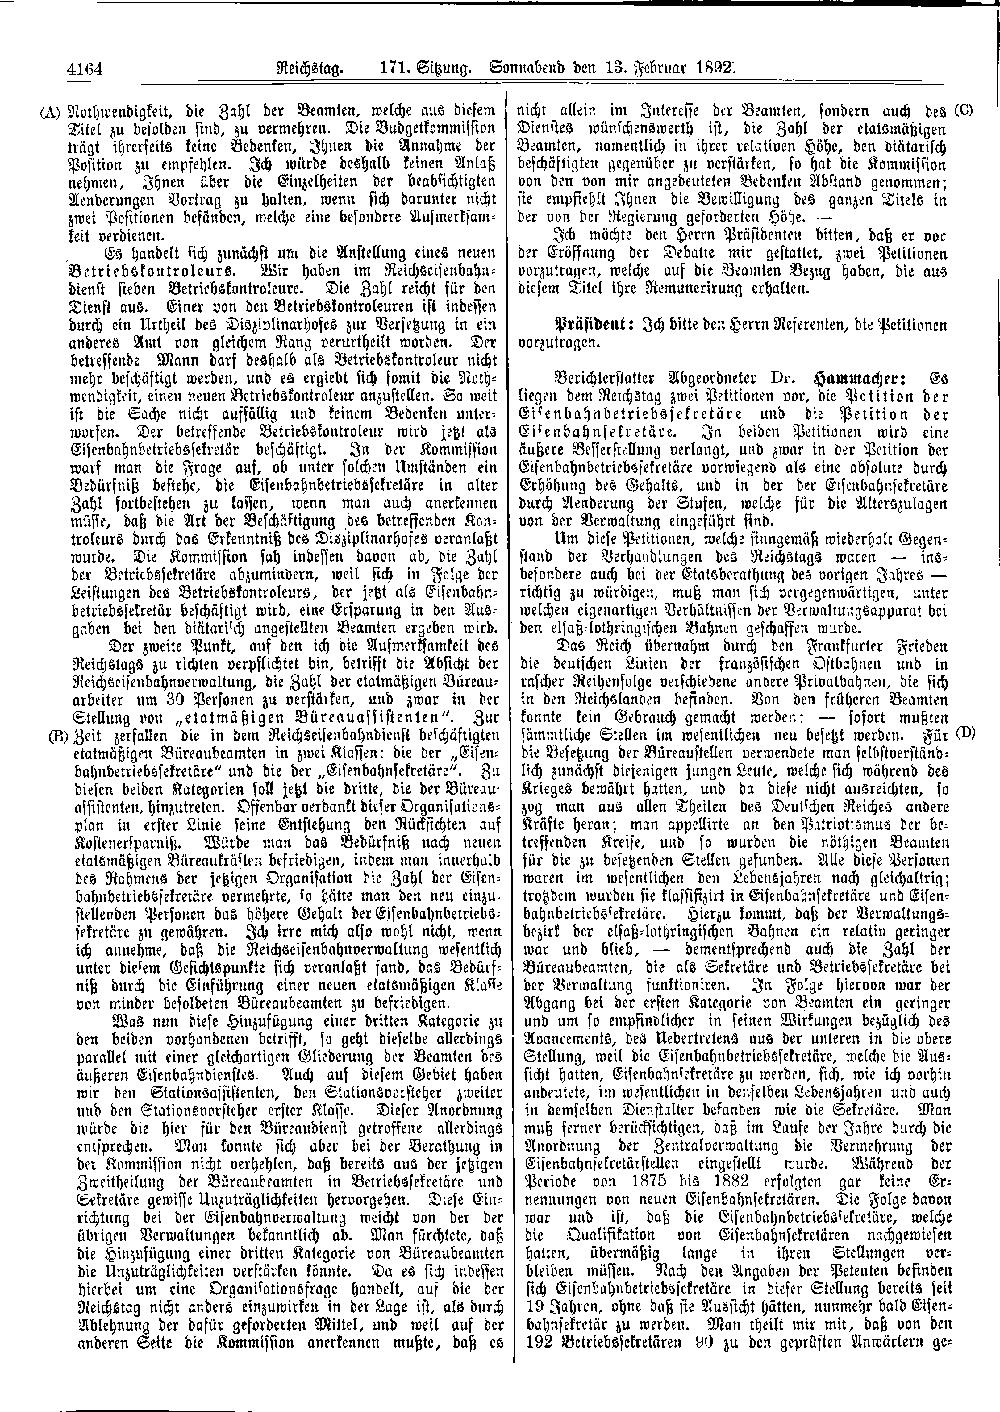 Scan of page 4164